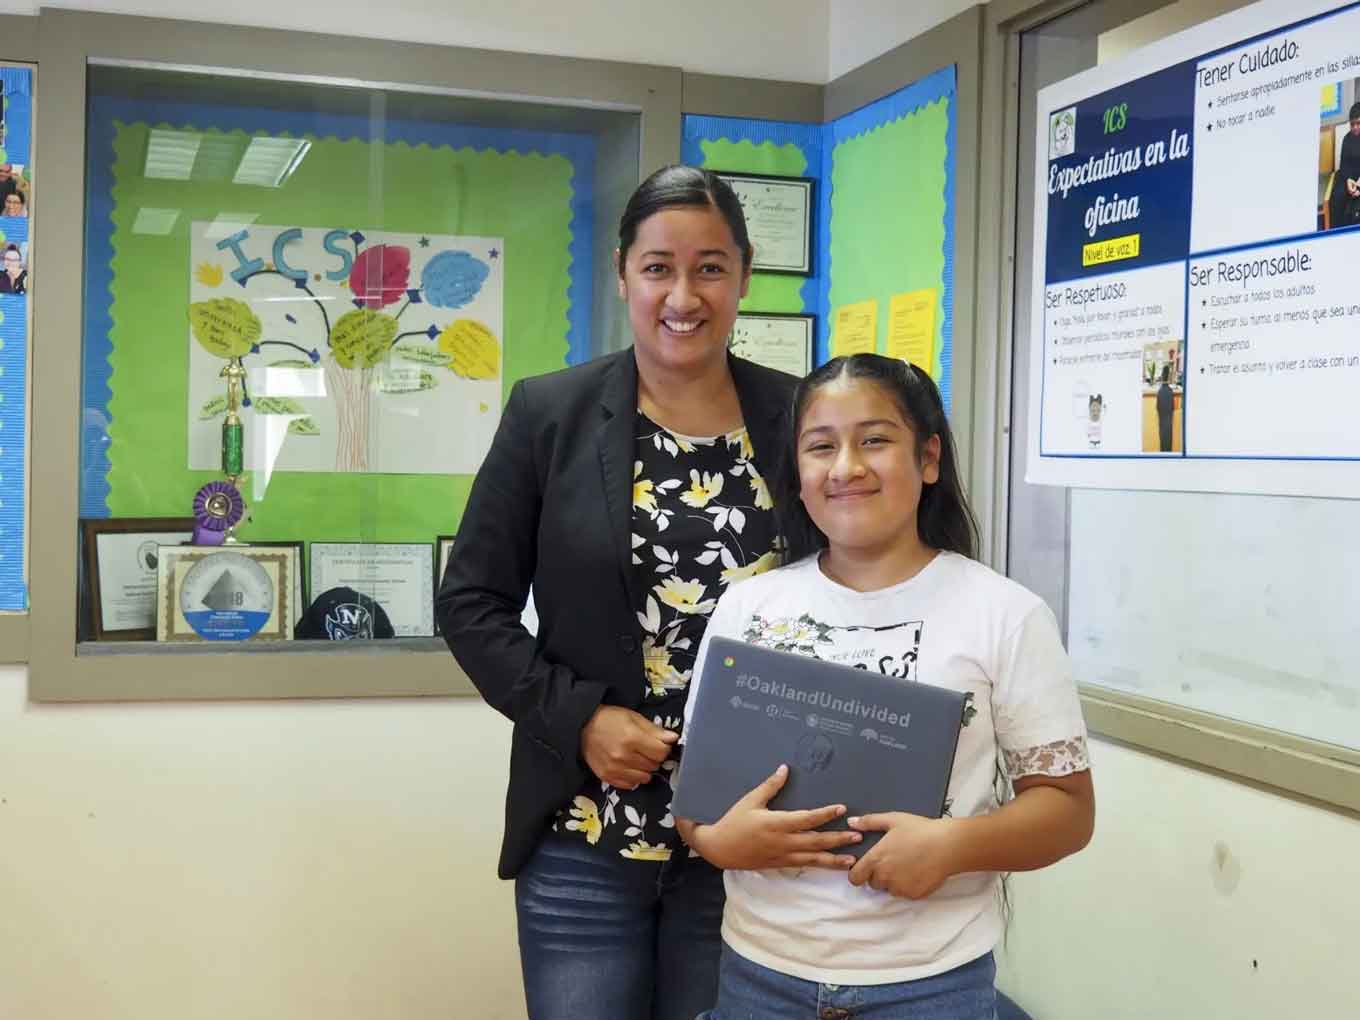 Maria G. Islas, a staff member at Think College Now, a public elementary school in Oakland, with her daughter, Jesimiel Merida-Islas, who received a laptop and hot spot after months of sharing a computer with her mother.